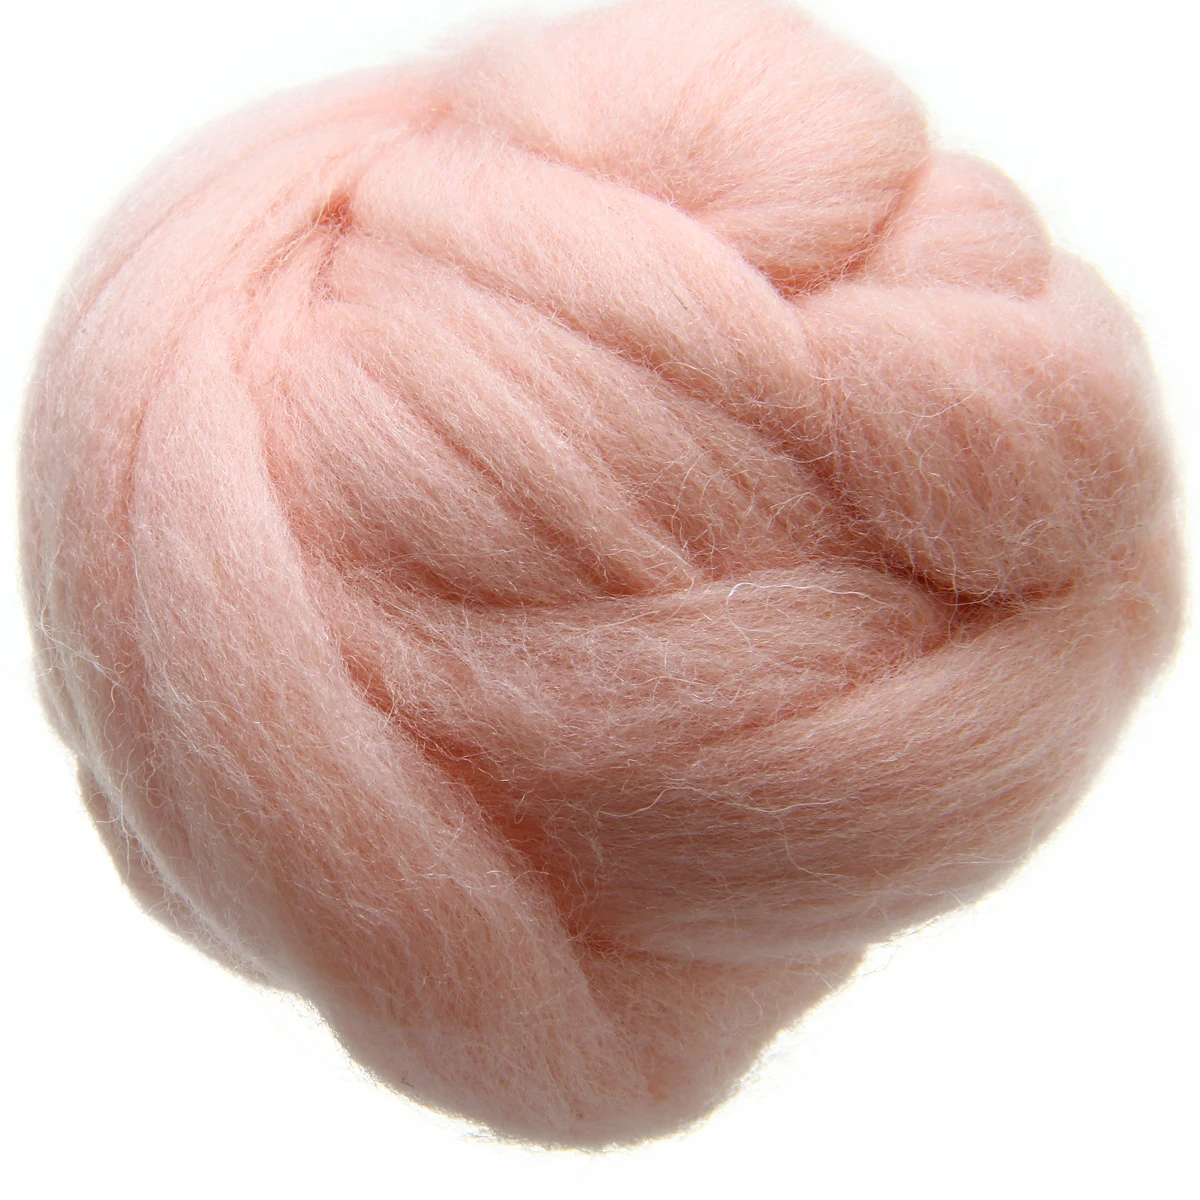 Pale Coral Merino Roving Felting Wool Fiber Dyed Wool Tops 50g Sewing DIY Needle Felting for Halloween Christmas Party Decor